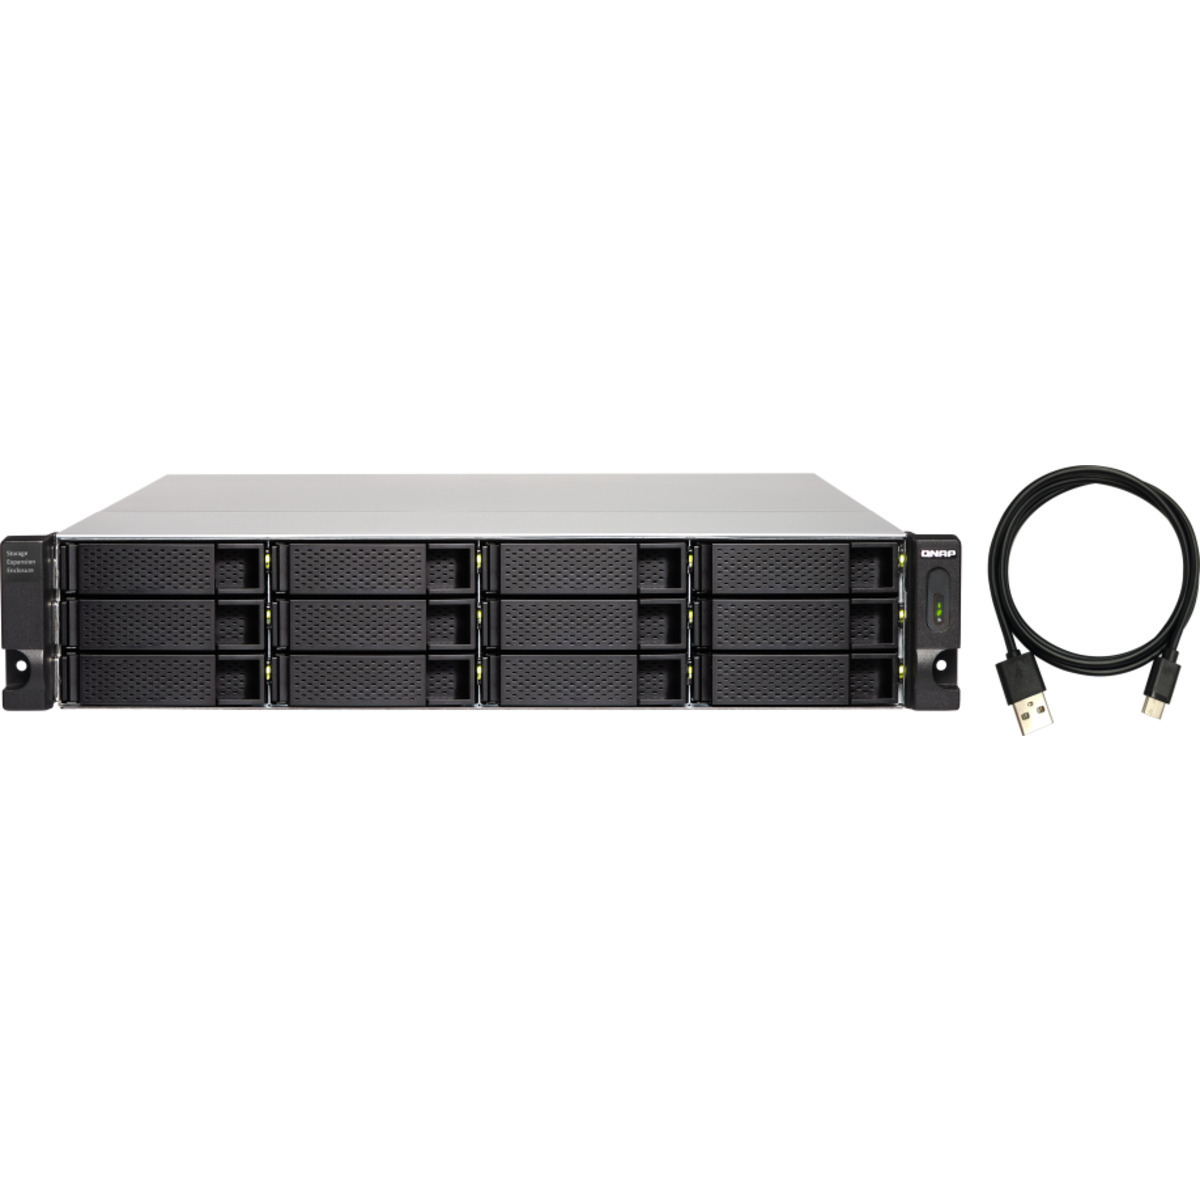 QNAP TL-R1200C-RP Expansion Enclosure Burn-In Tested Configurations